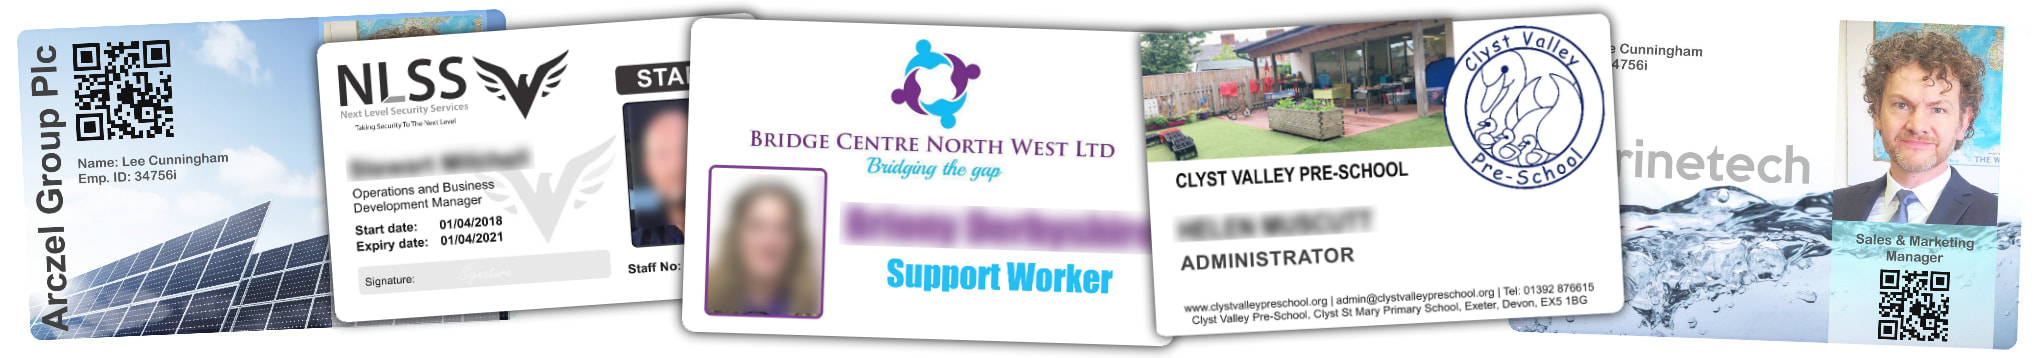 Bournemouth examples of staff photo ID cards | samples of employee Identity card printing | Workers ID cards printed in 